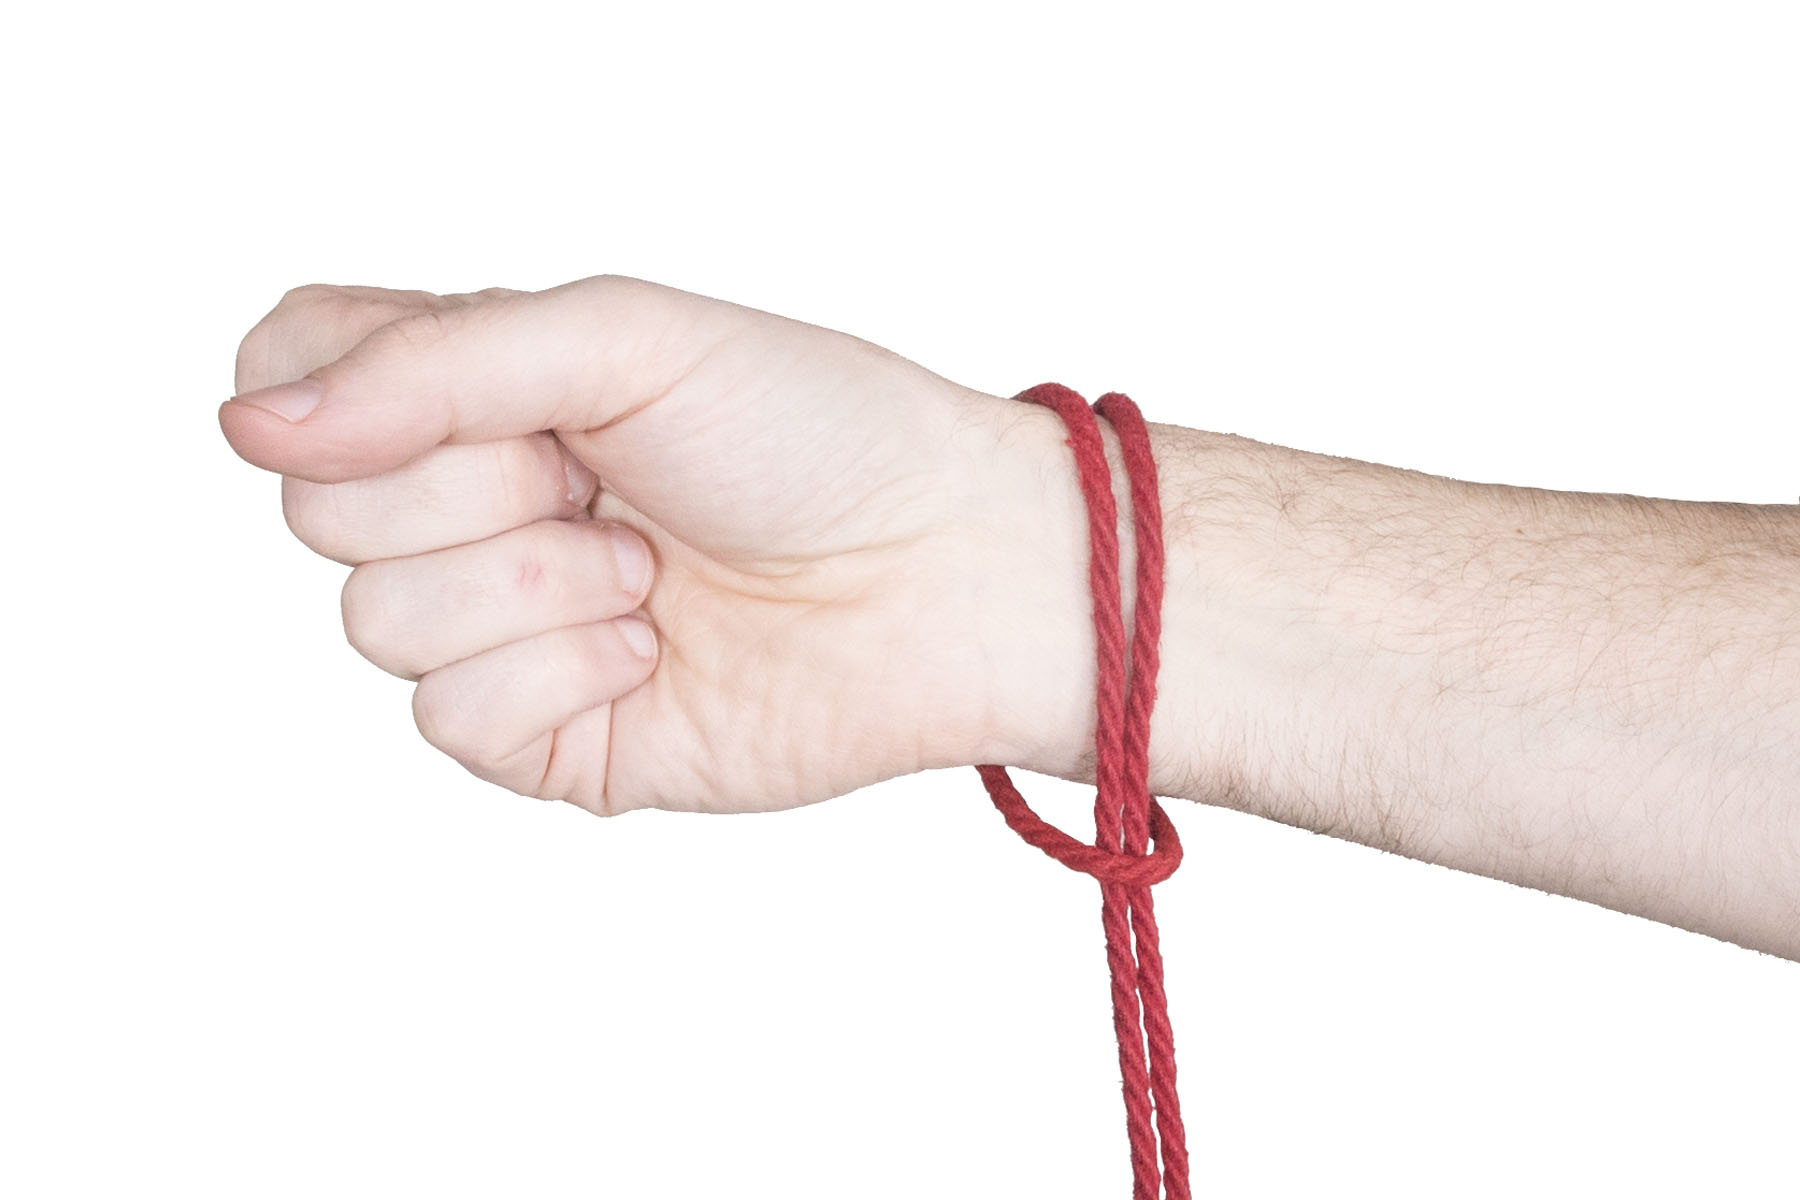 The rigger’s right hand has a lark’s head over the wrist. The lark’s head is tied in 4 milimeter red hemp rope. The bight of the rope comes up over the front side of the wrist and down the back side. Just below the wrist, the ends of the rope go through the bight and hang downward.